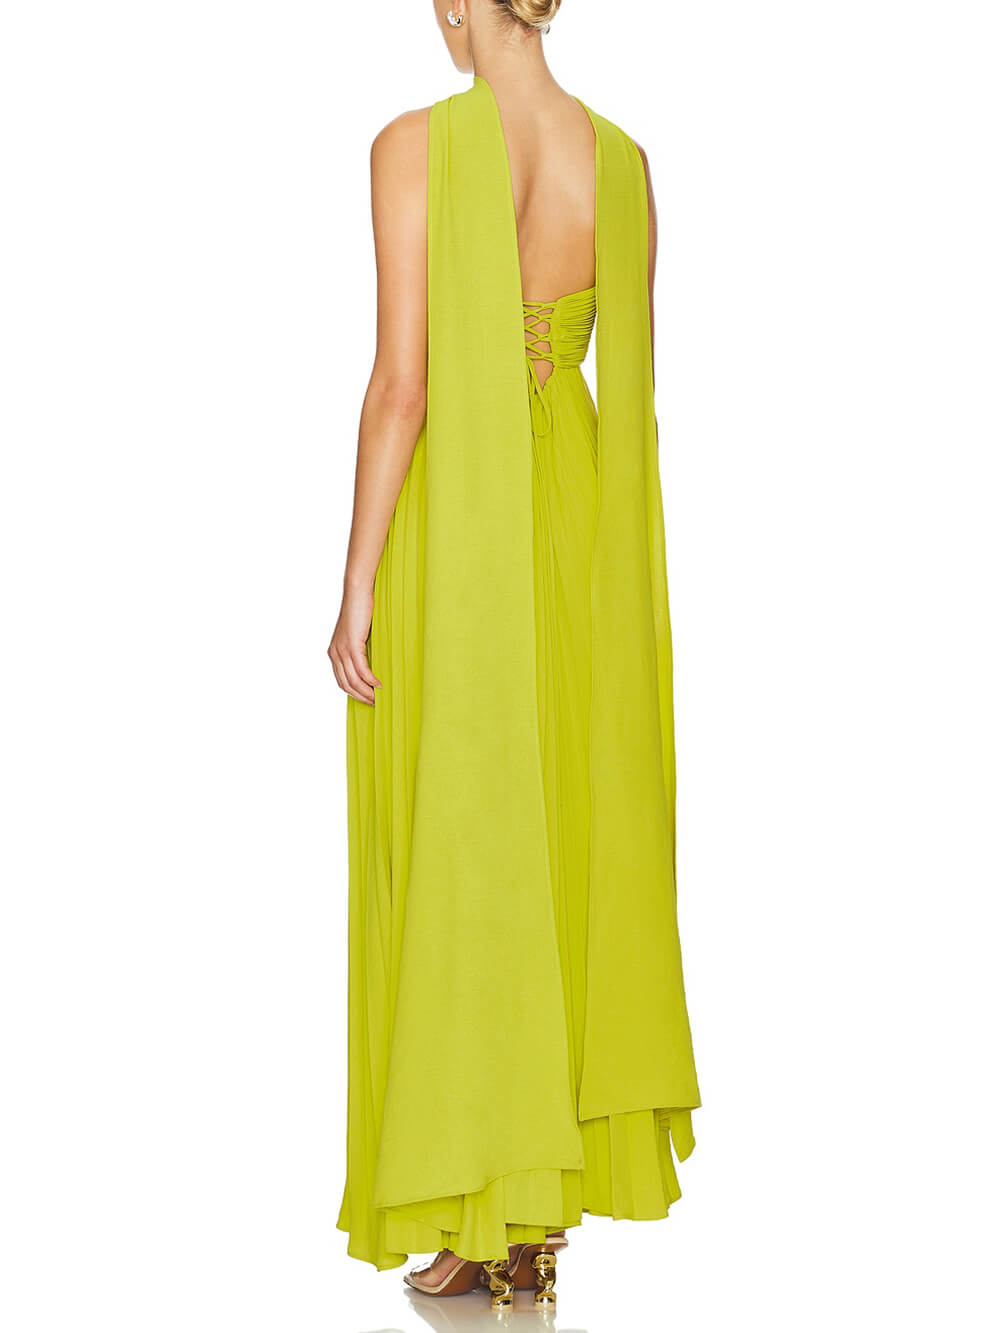 Exquisite Elegant Pleated Off-the-shoulder Party Maxi Dress